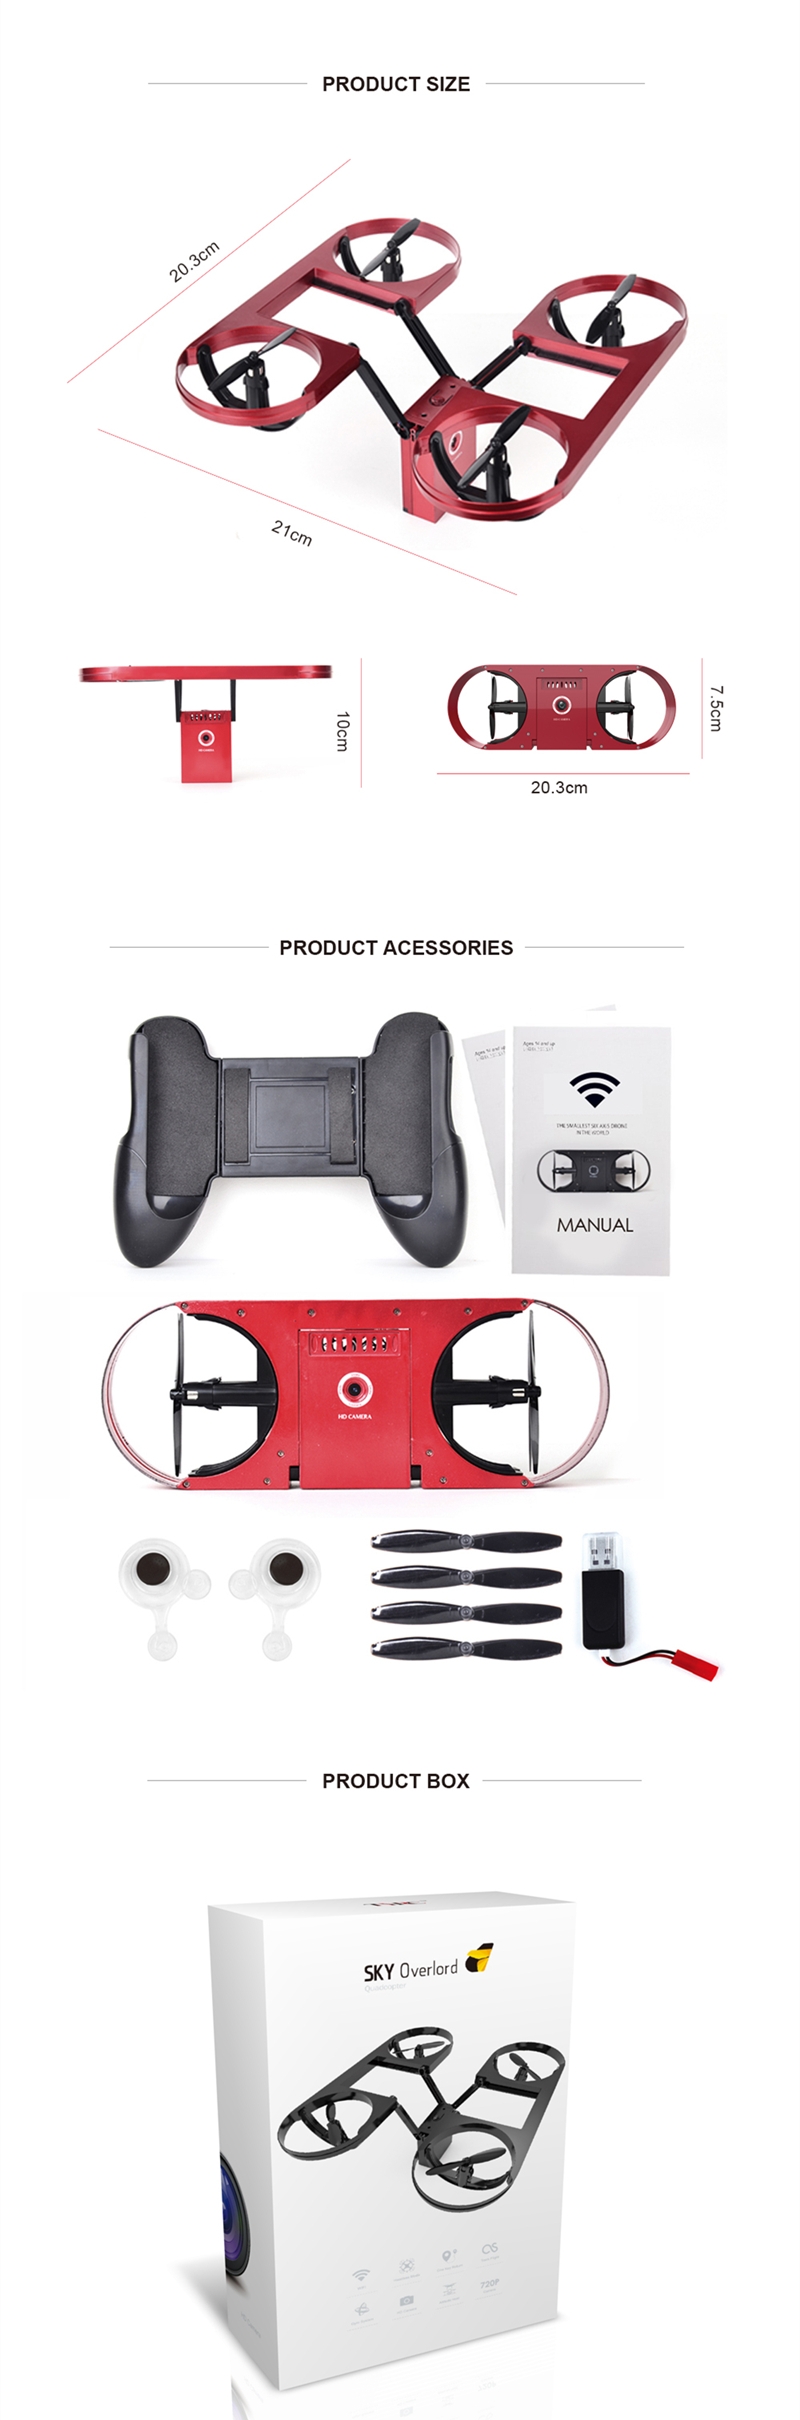 TYRC TY6 WIFI FPV With 2MP Camera Altitude Hold Mode Foldable Arm RC Drone Quadcopter